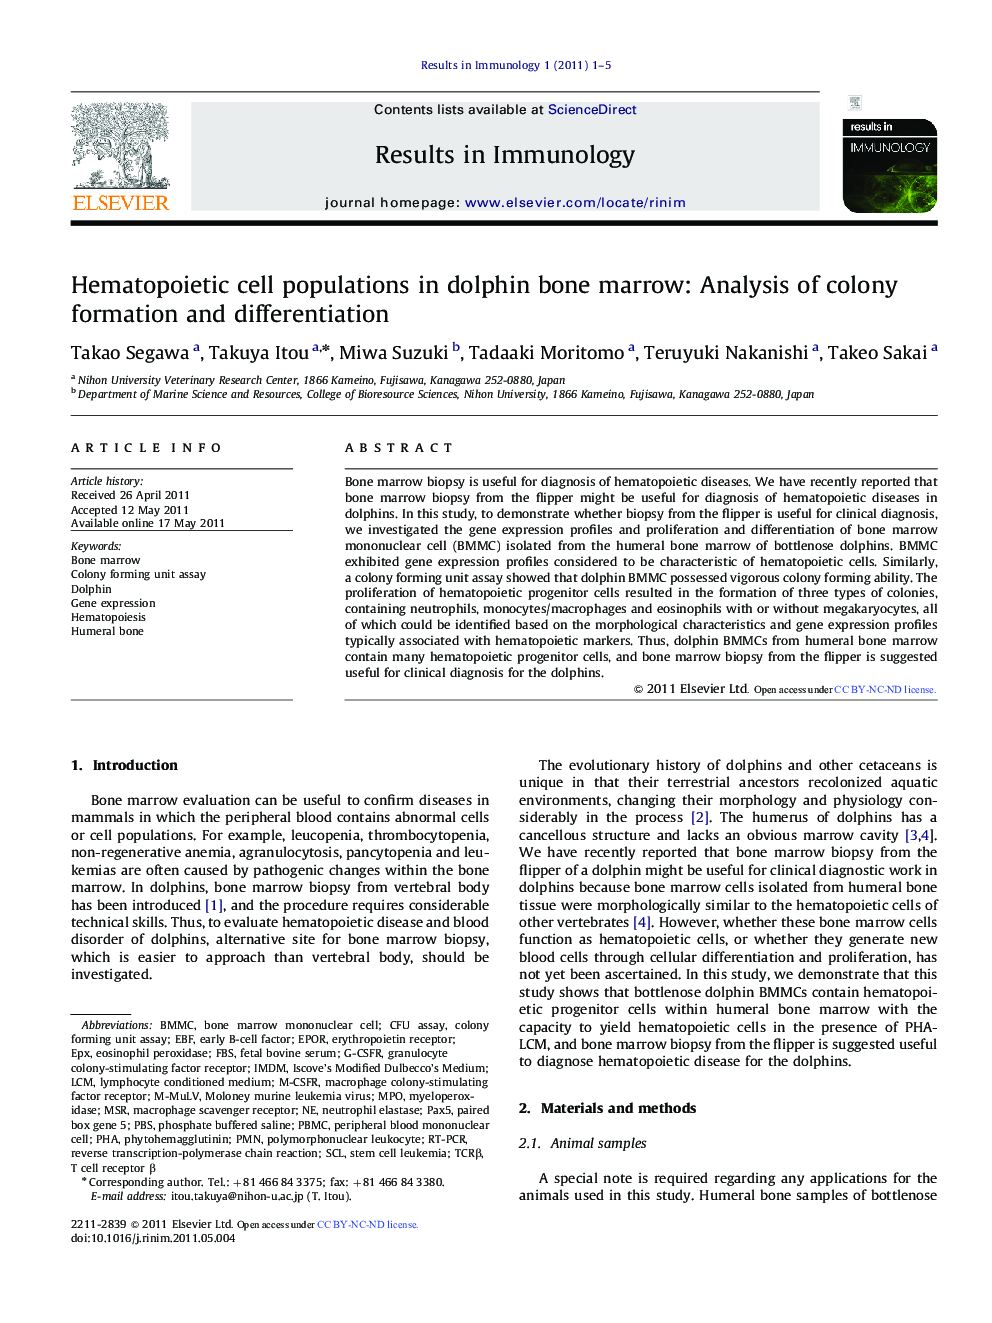 Hematopoietic cell populations in dolphin bone marrow: Analysis of colony formation and differentiation